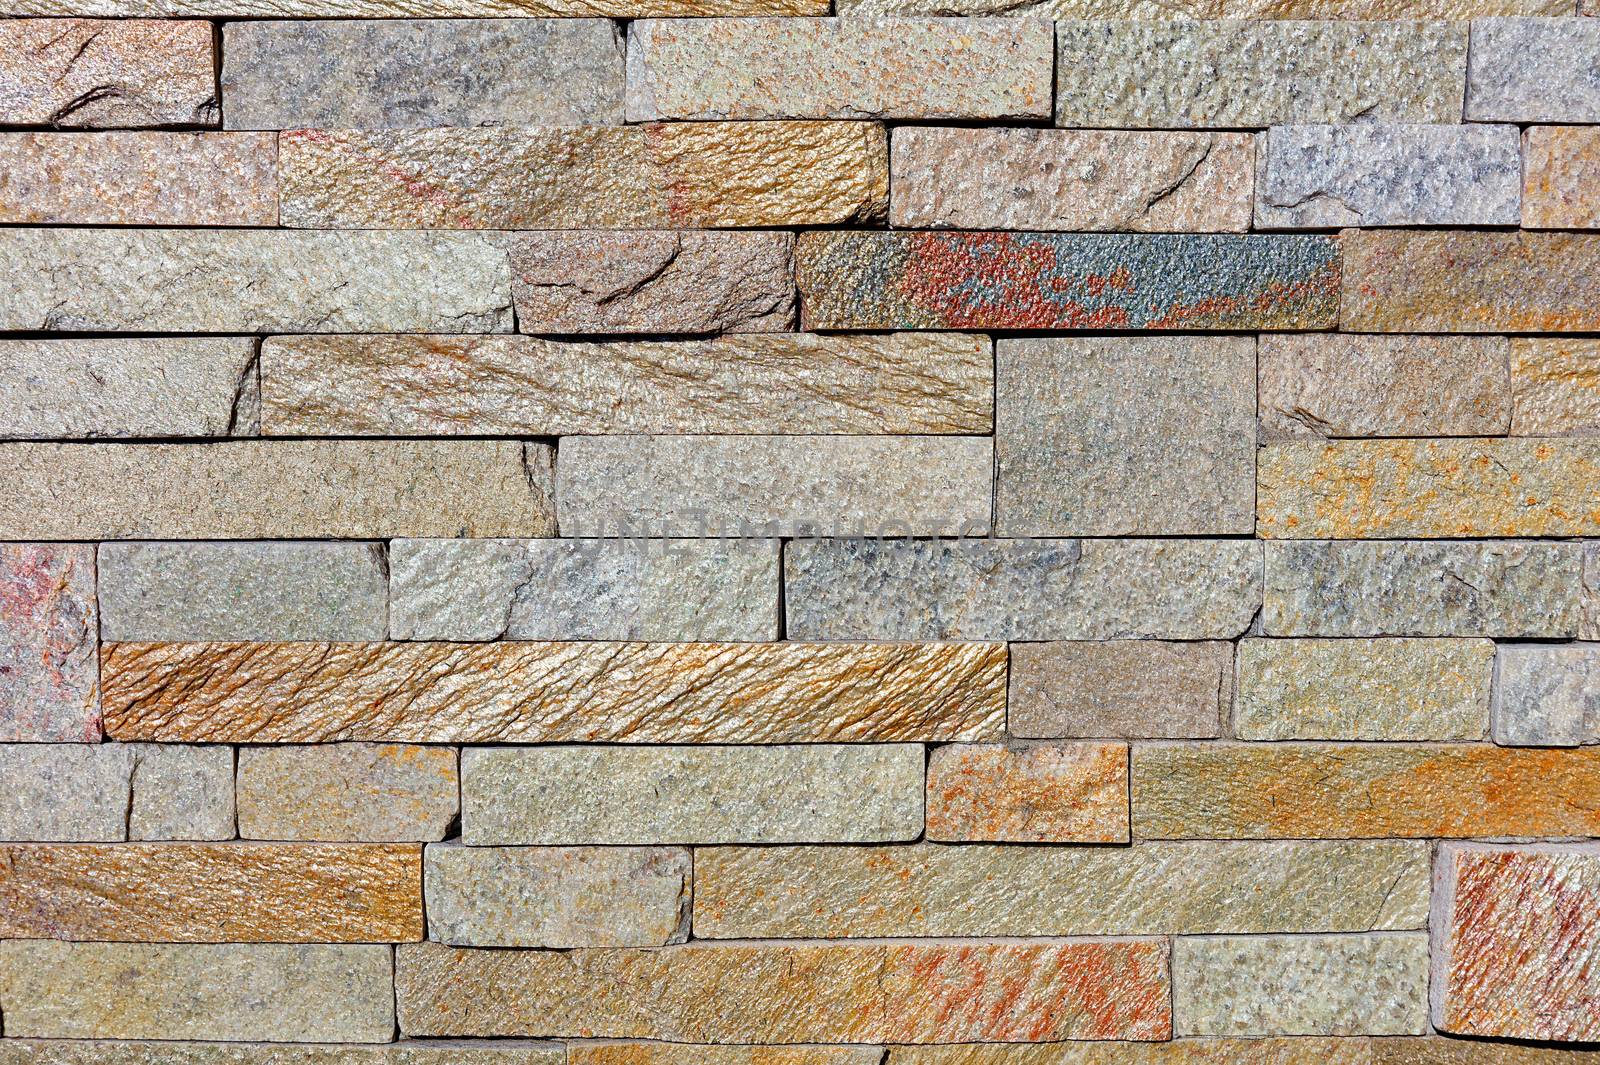 The texture of the old wall lined with shiny rough sandstone tiles. by Sergii